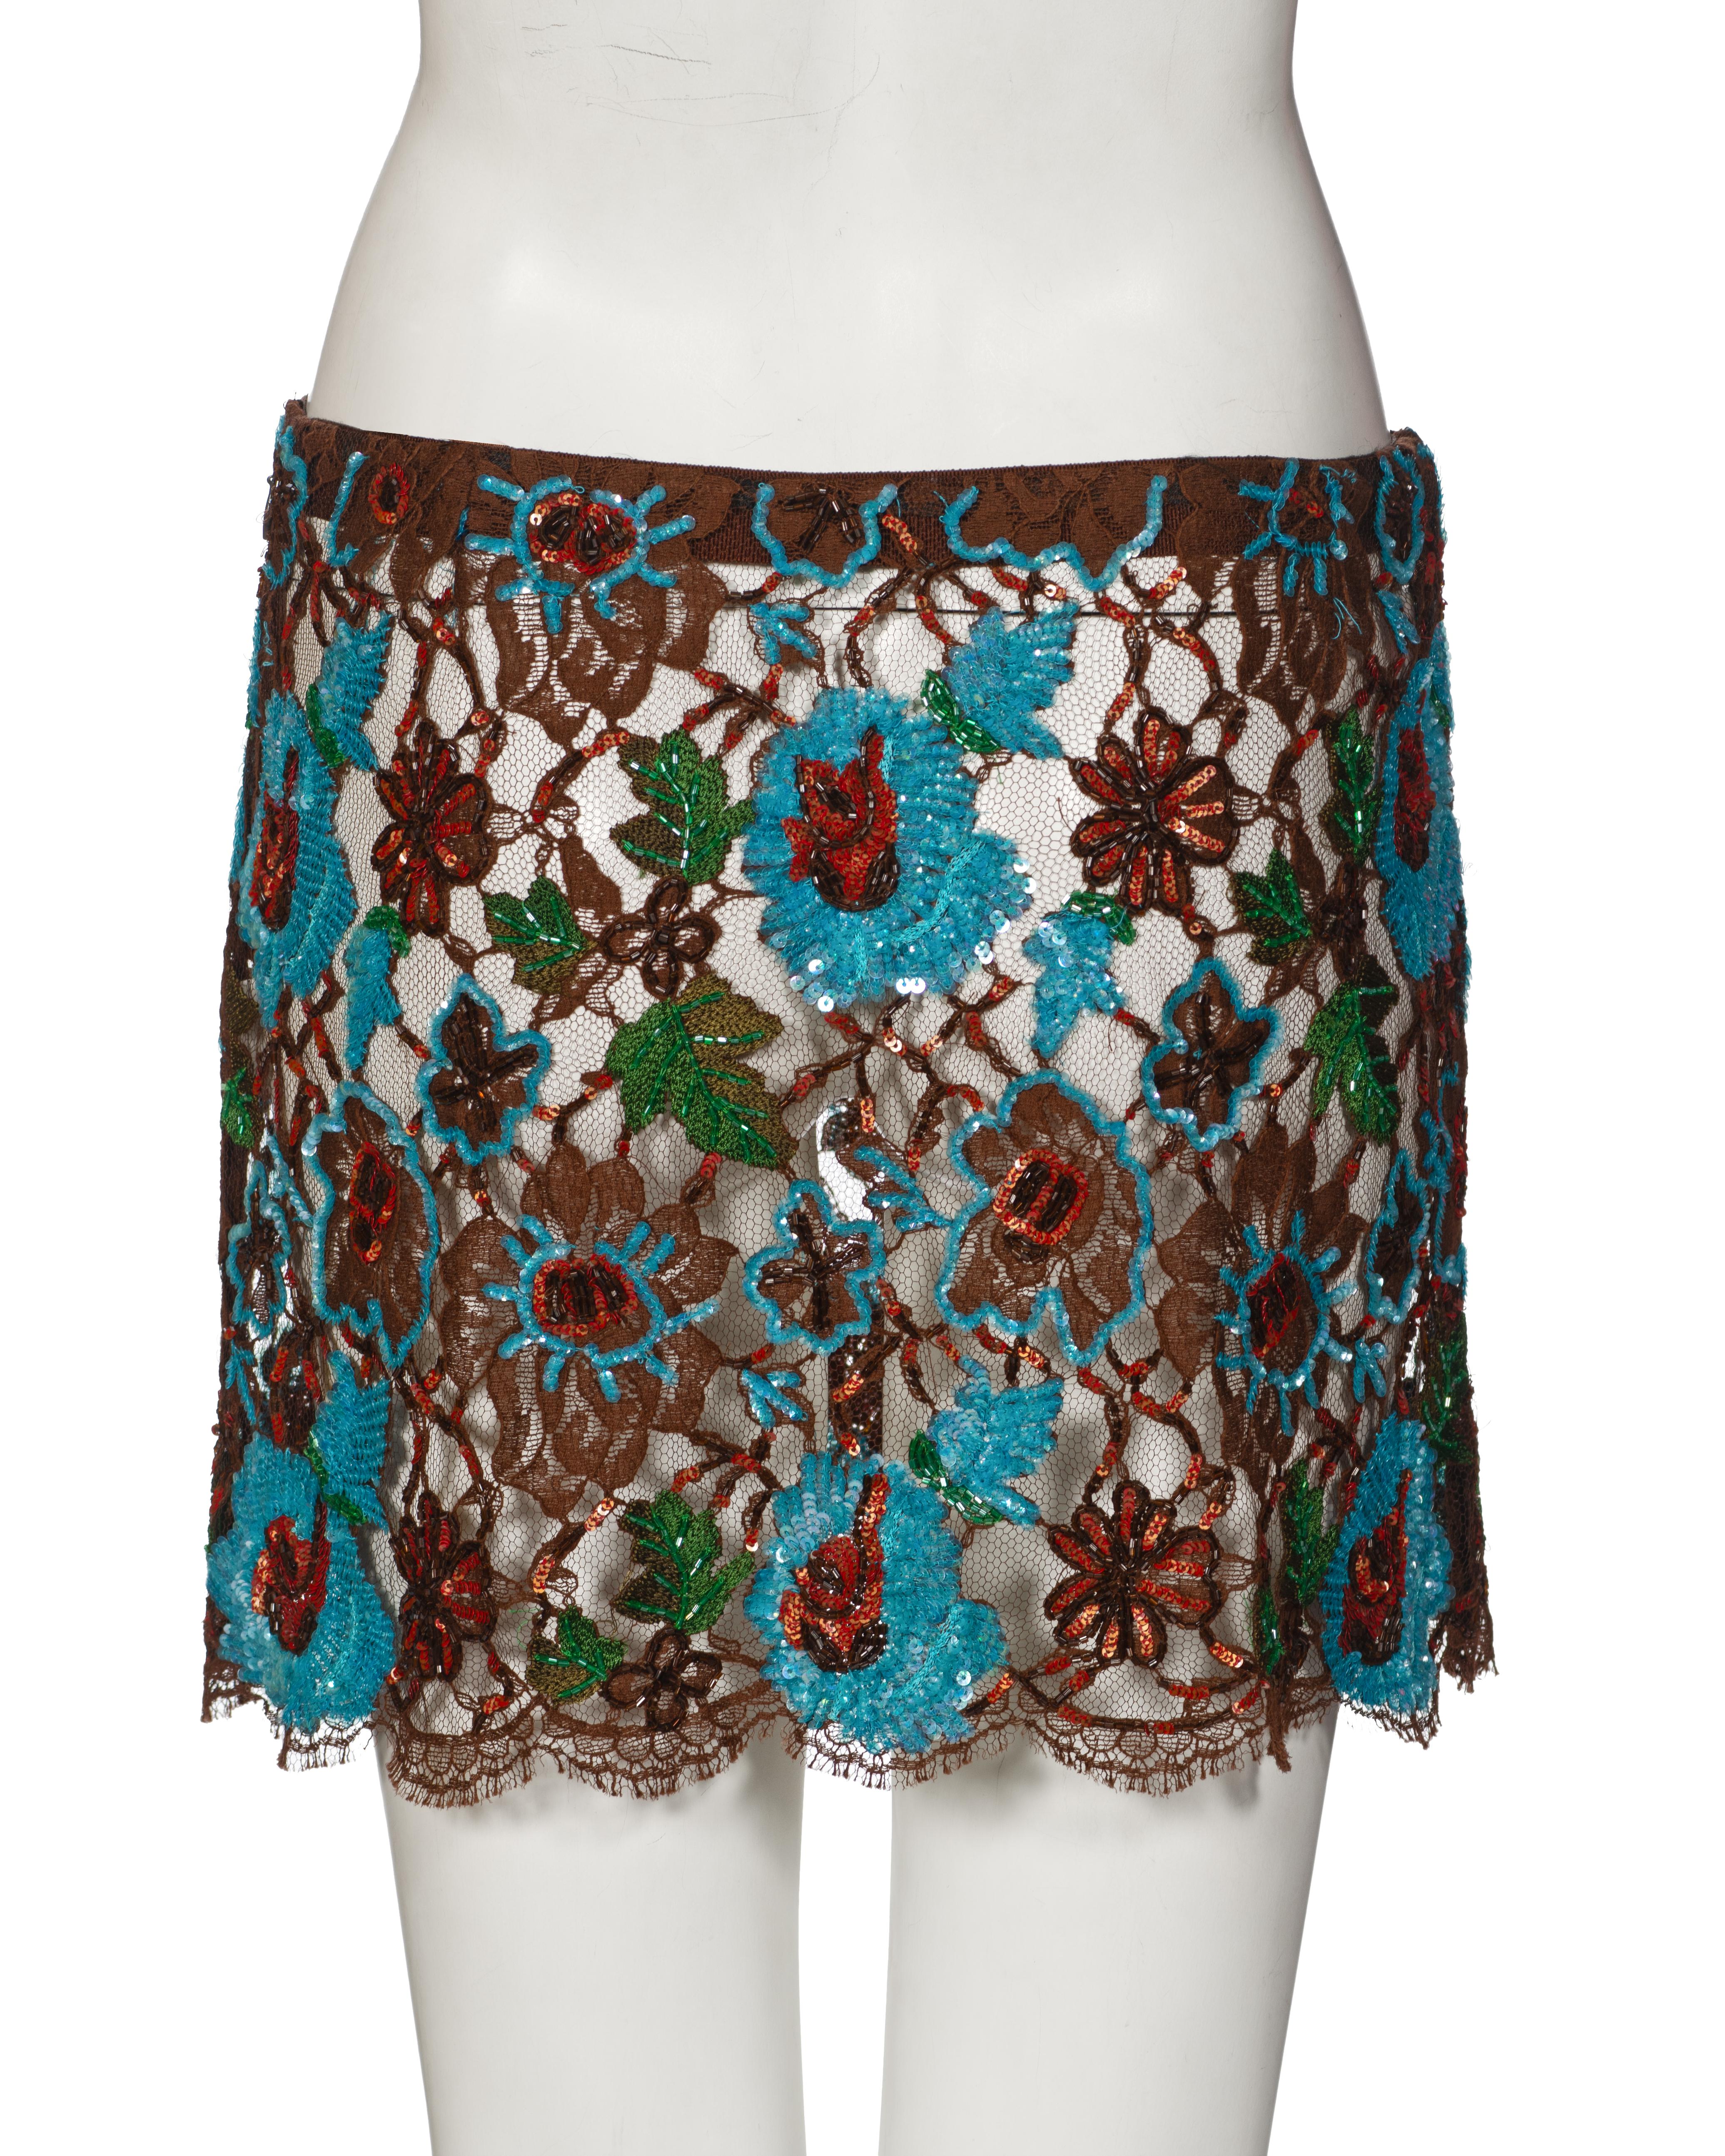 Dolce & Gabbana Floral Beaded and Sequin Lace Mini Skirt, fw 1999 For Sale 2